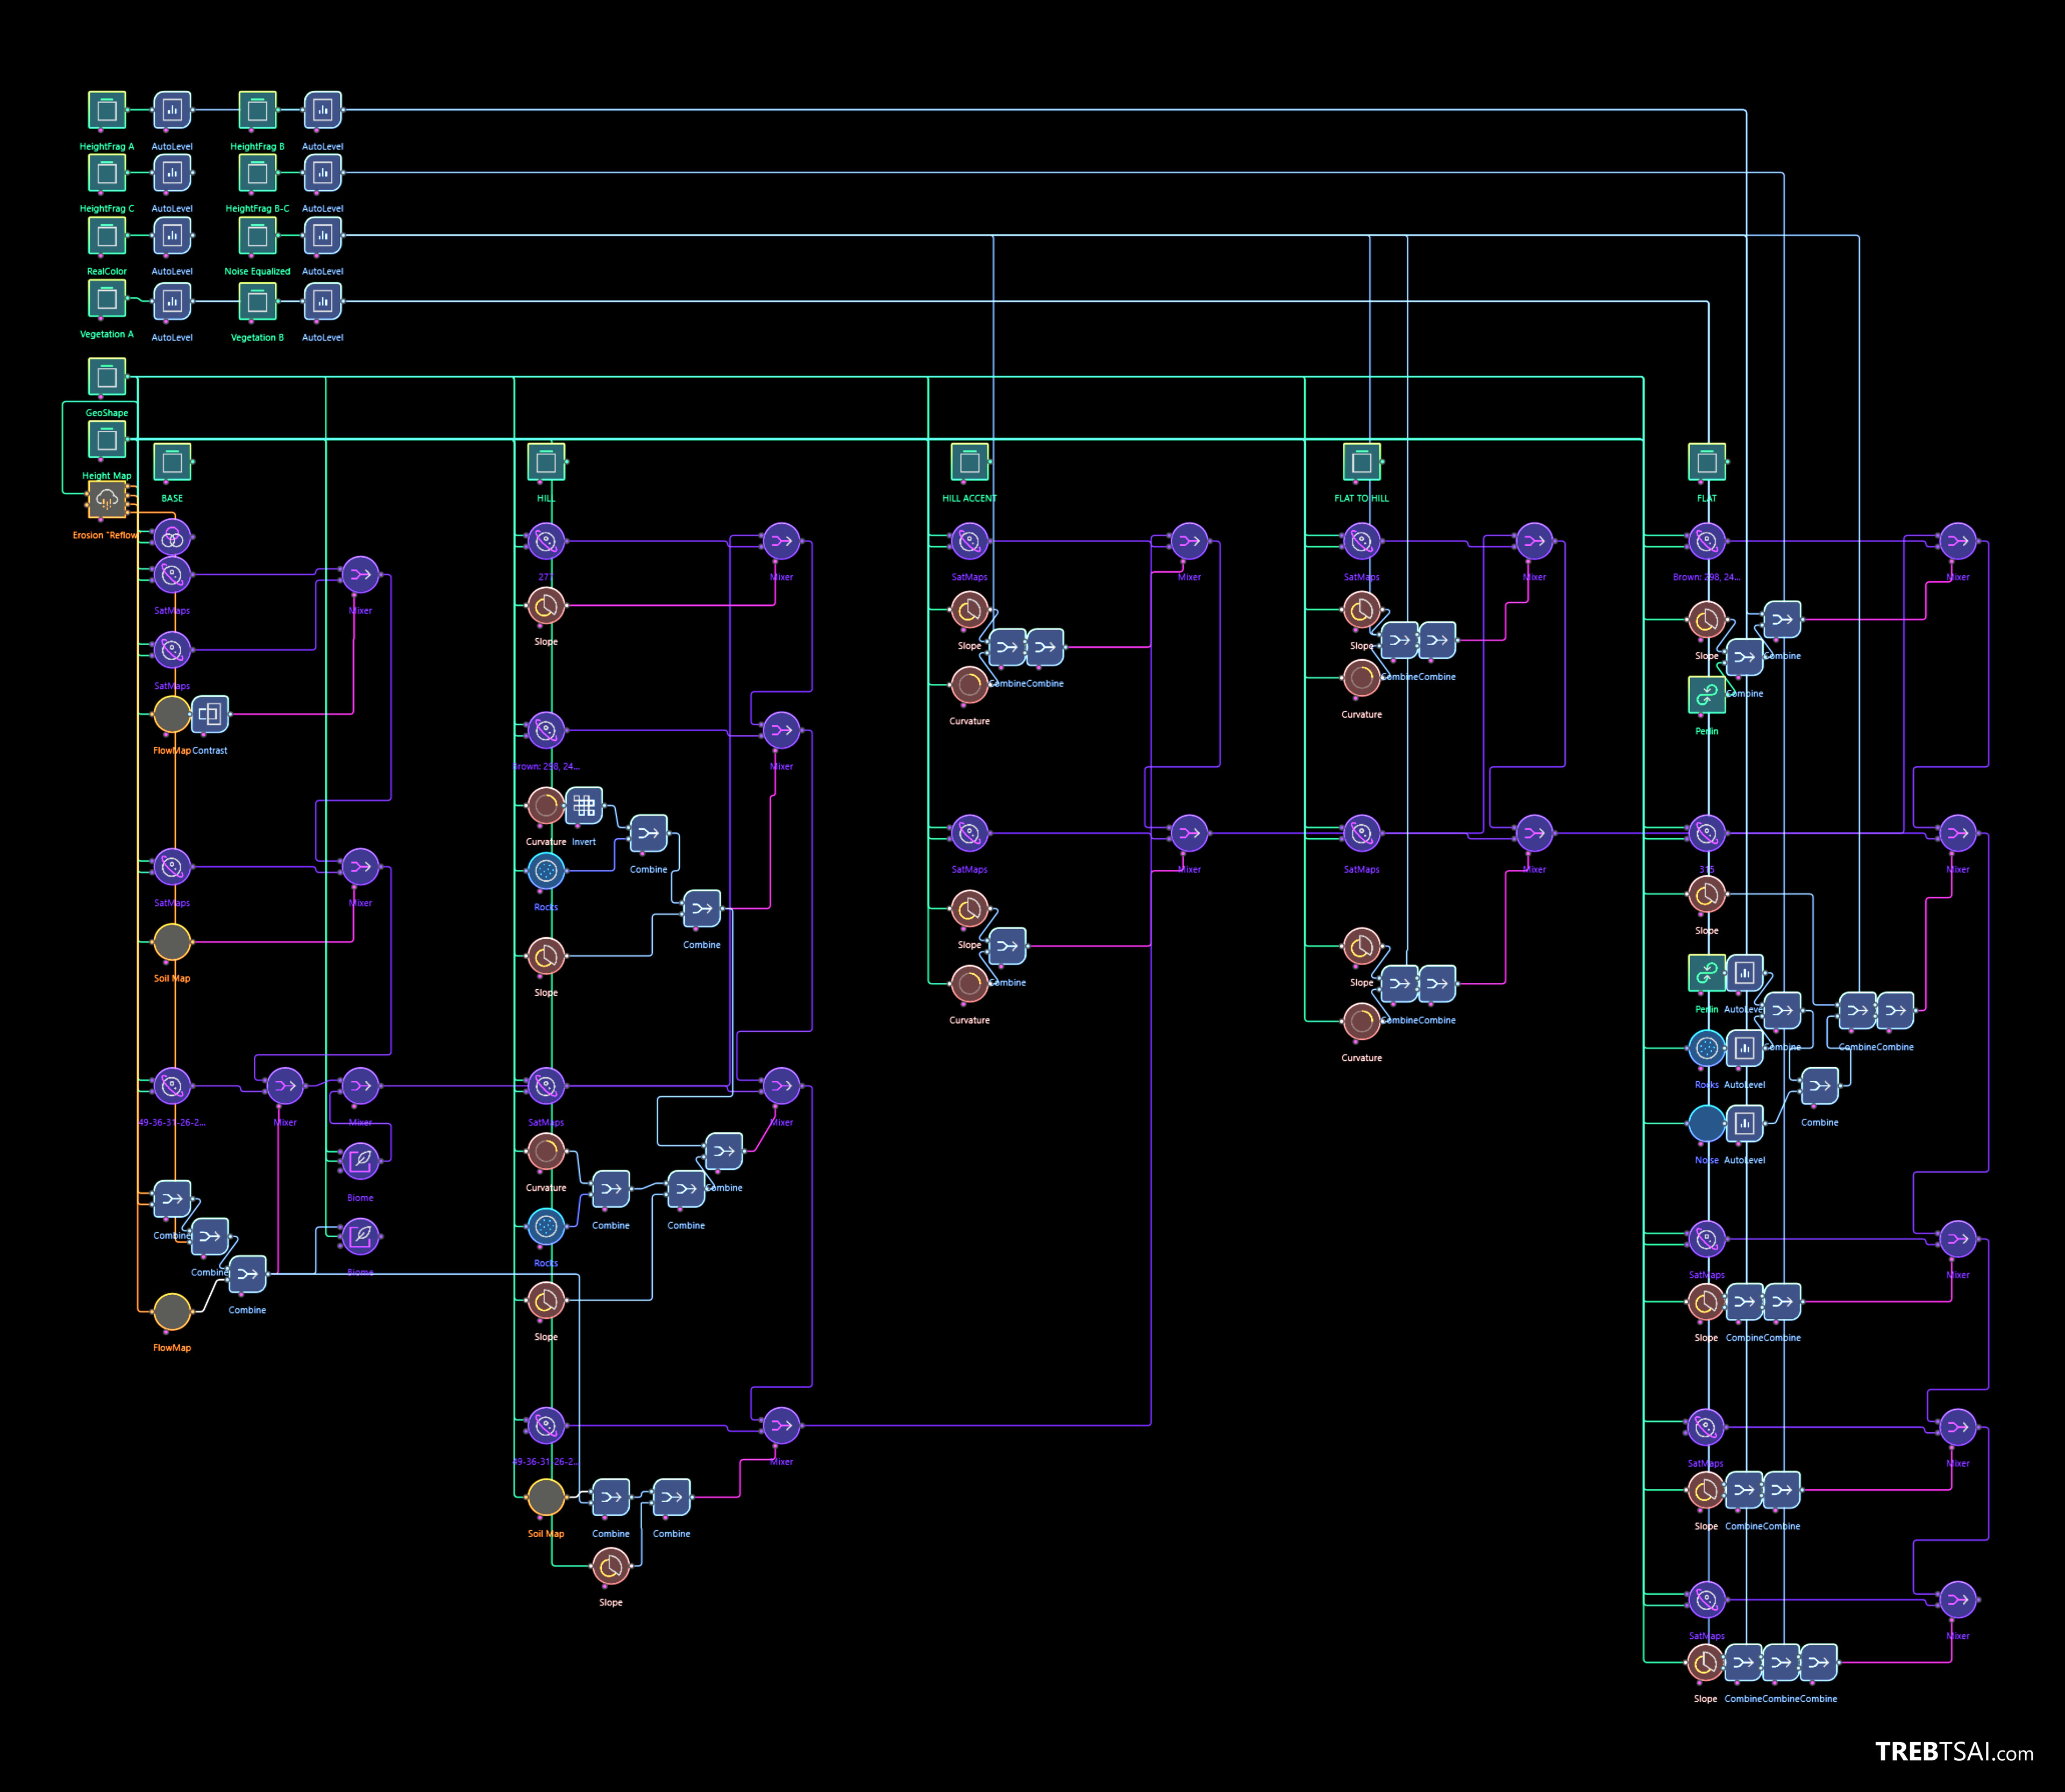 Masks that share common traits are grouped together, leaving room for expandability within the region without affecting the rest of the layout further down the chain.